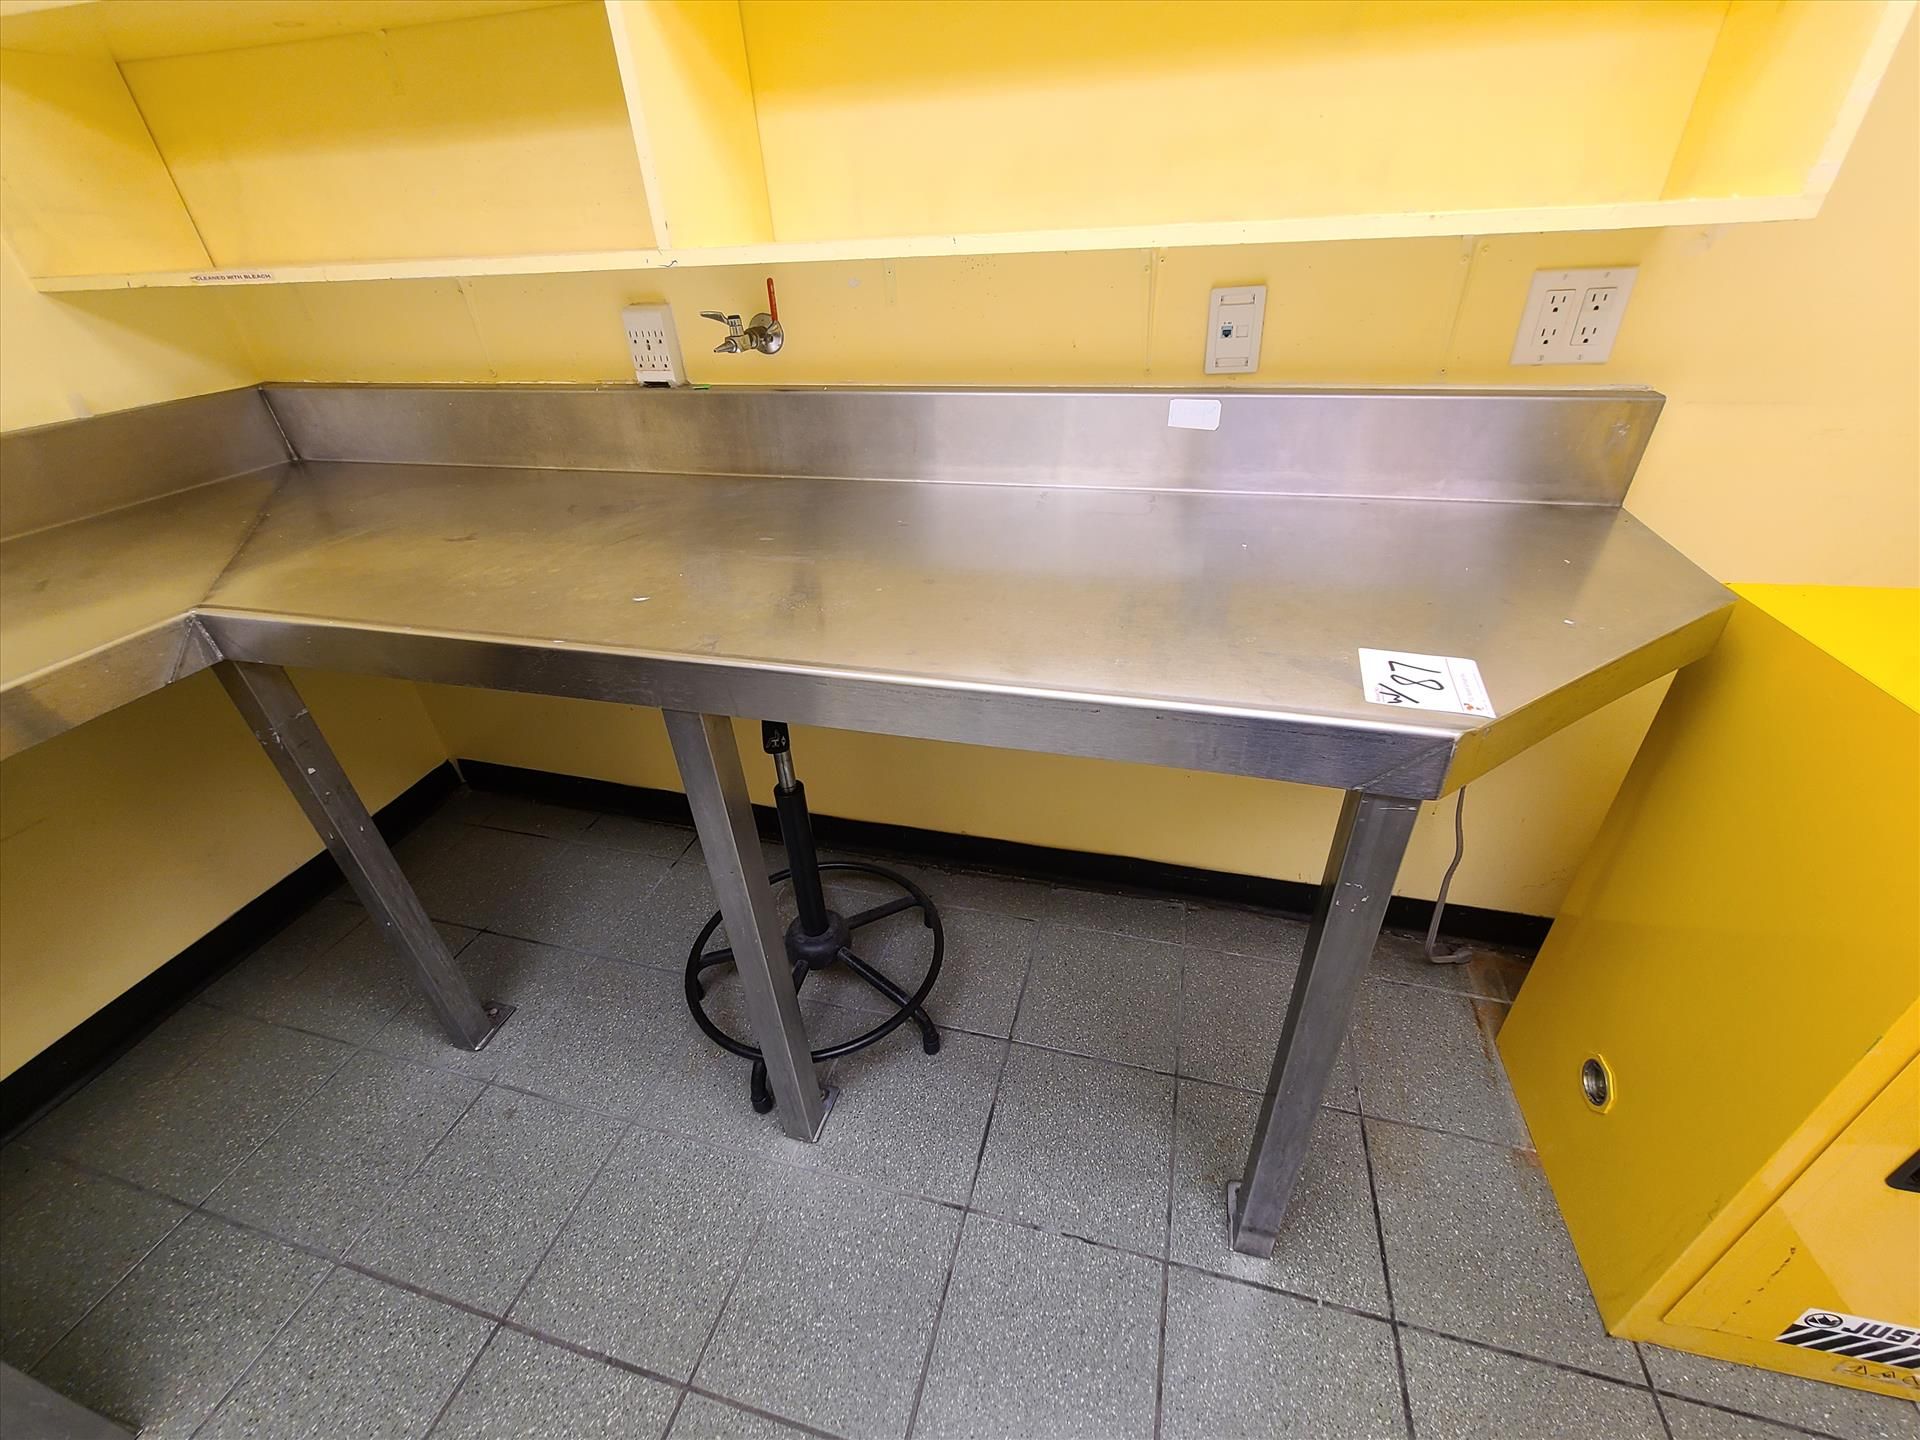 counter, stainless steel, approx. 28 in. x 22 ft. w/ sink [Loc. Lab] - Image 3 of 4